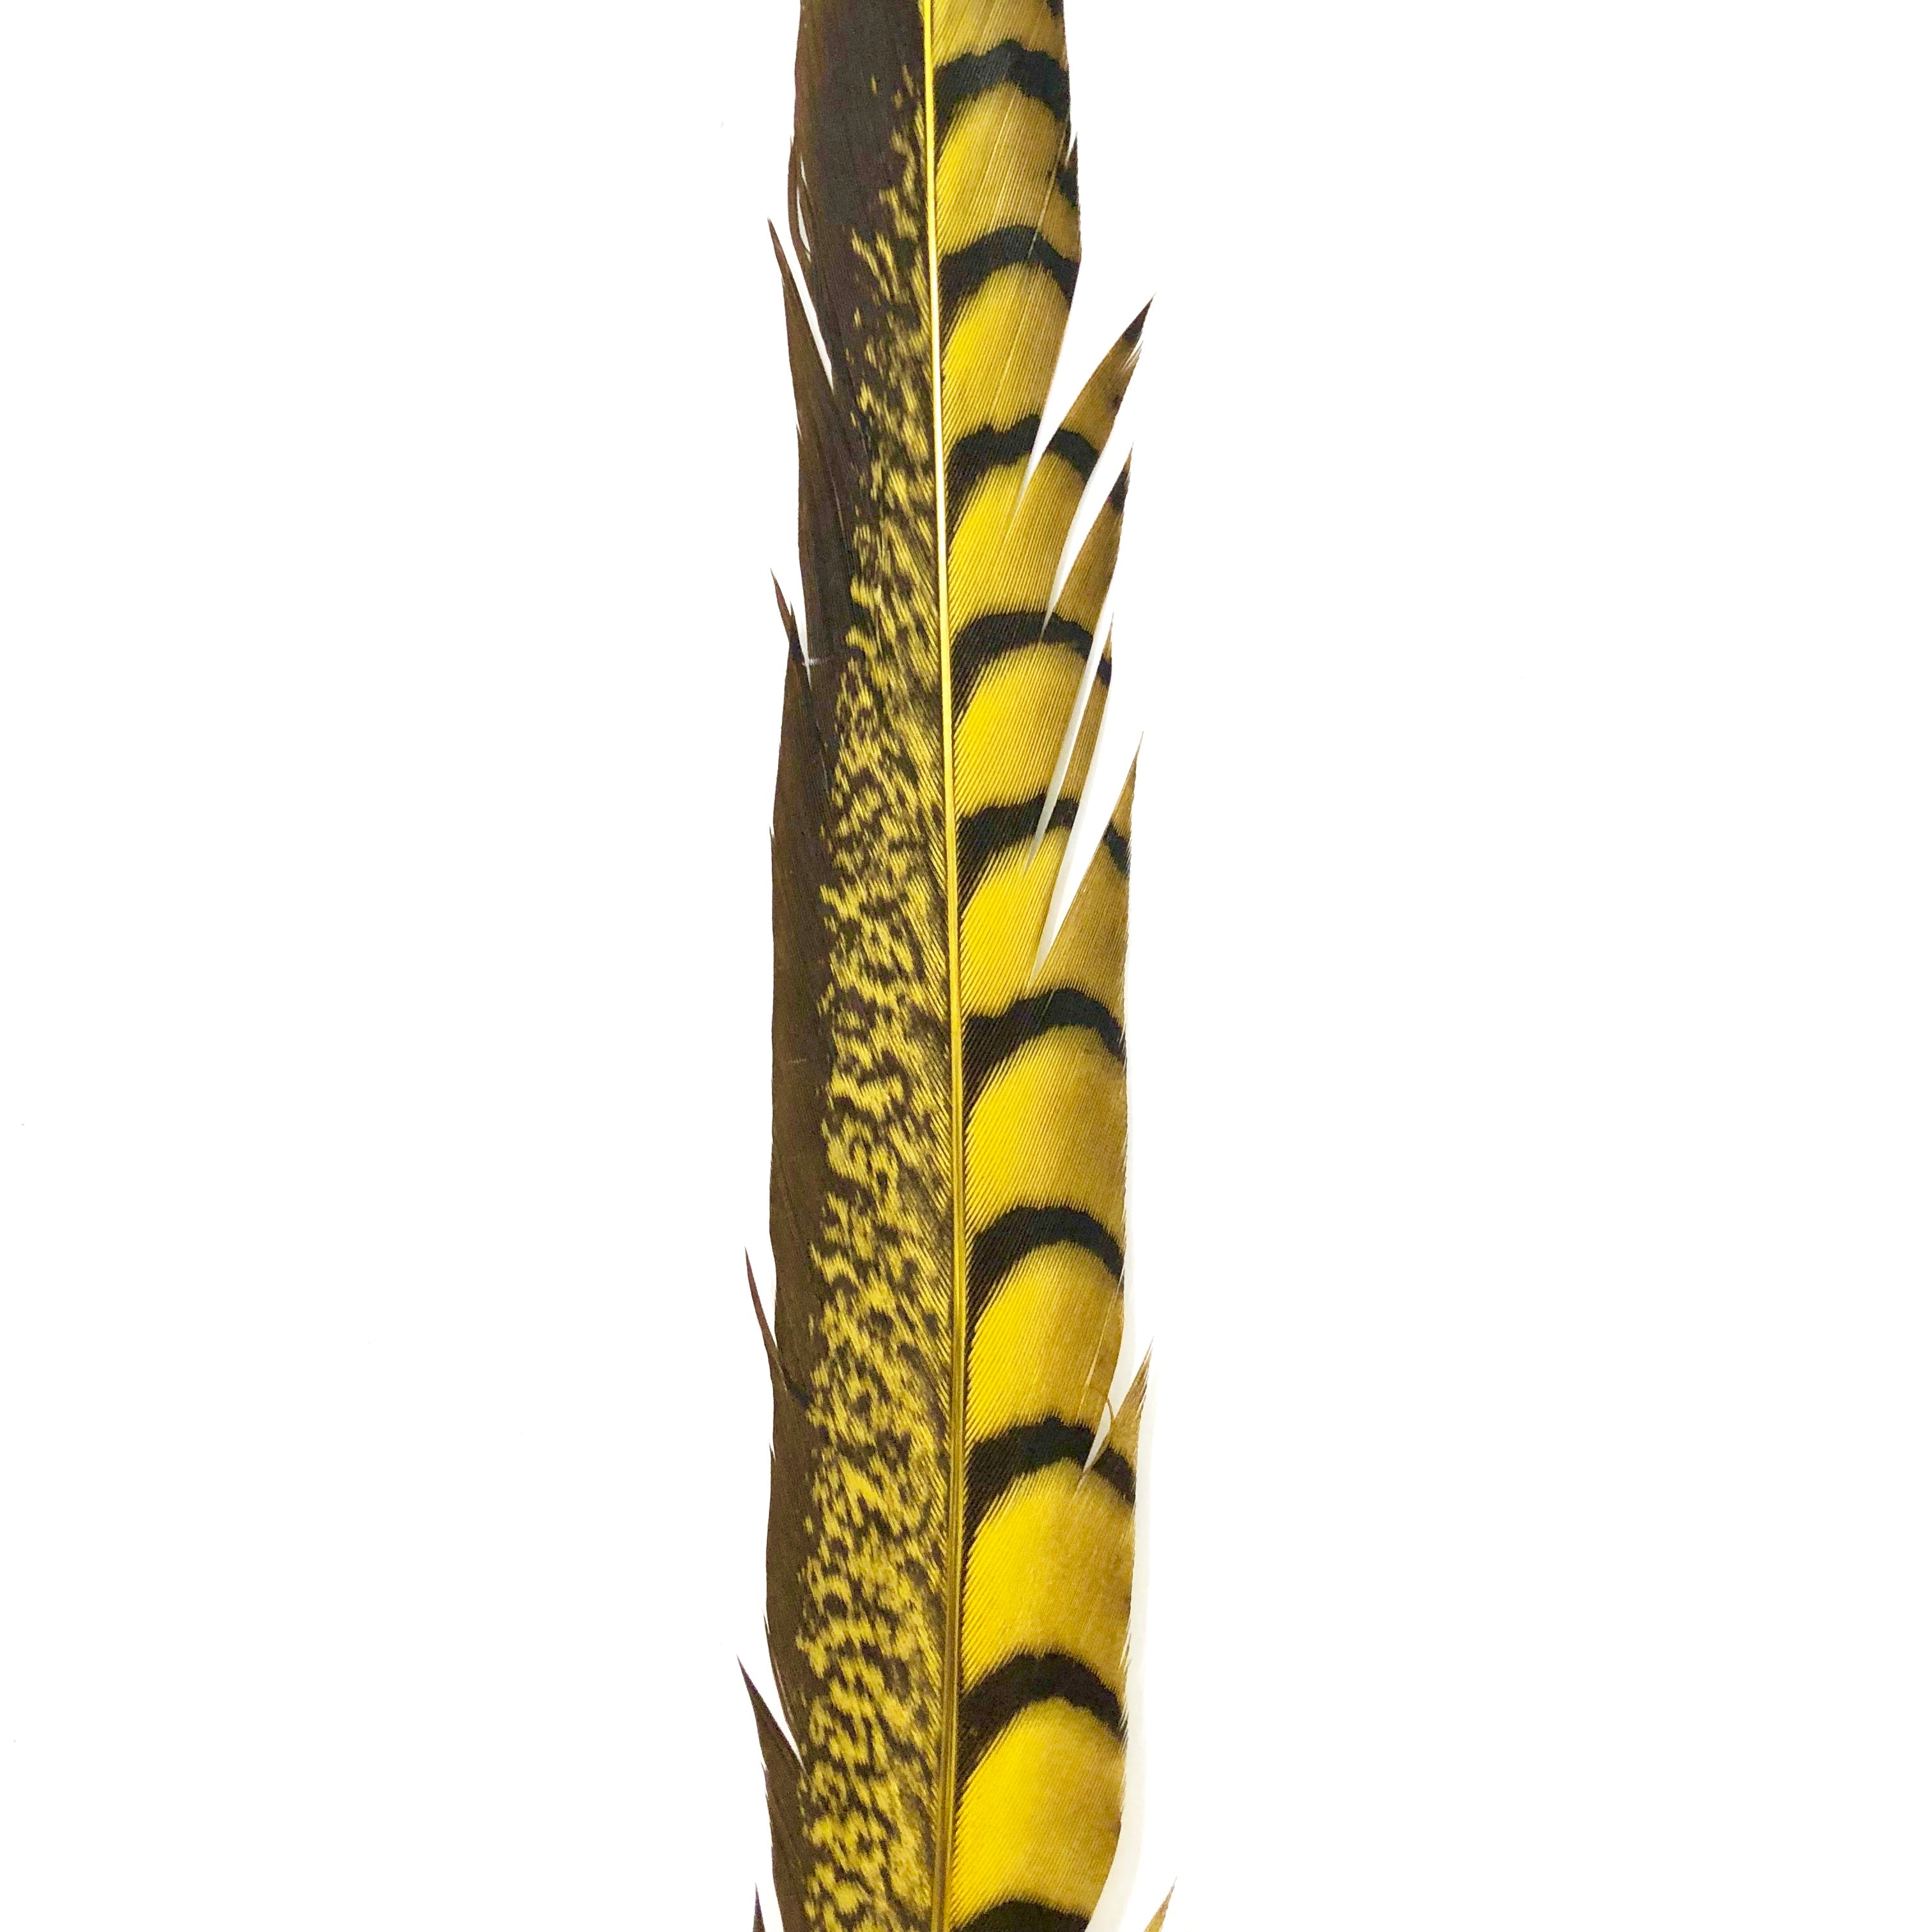 10" to 20" Lady Amherst Pheasant Side Tail Feather - Yellow